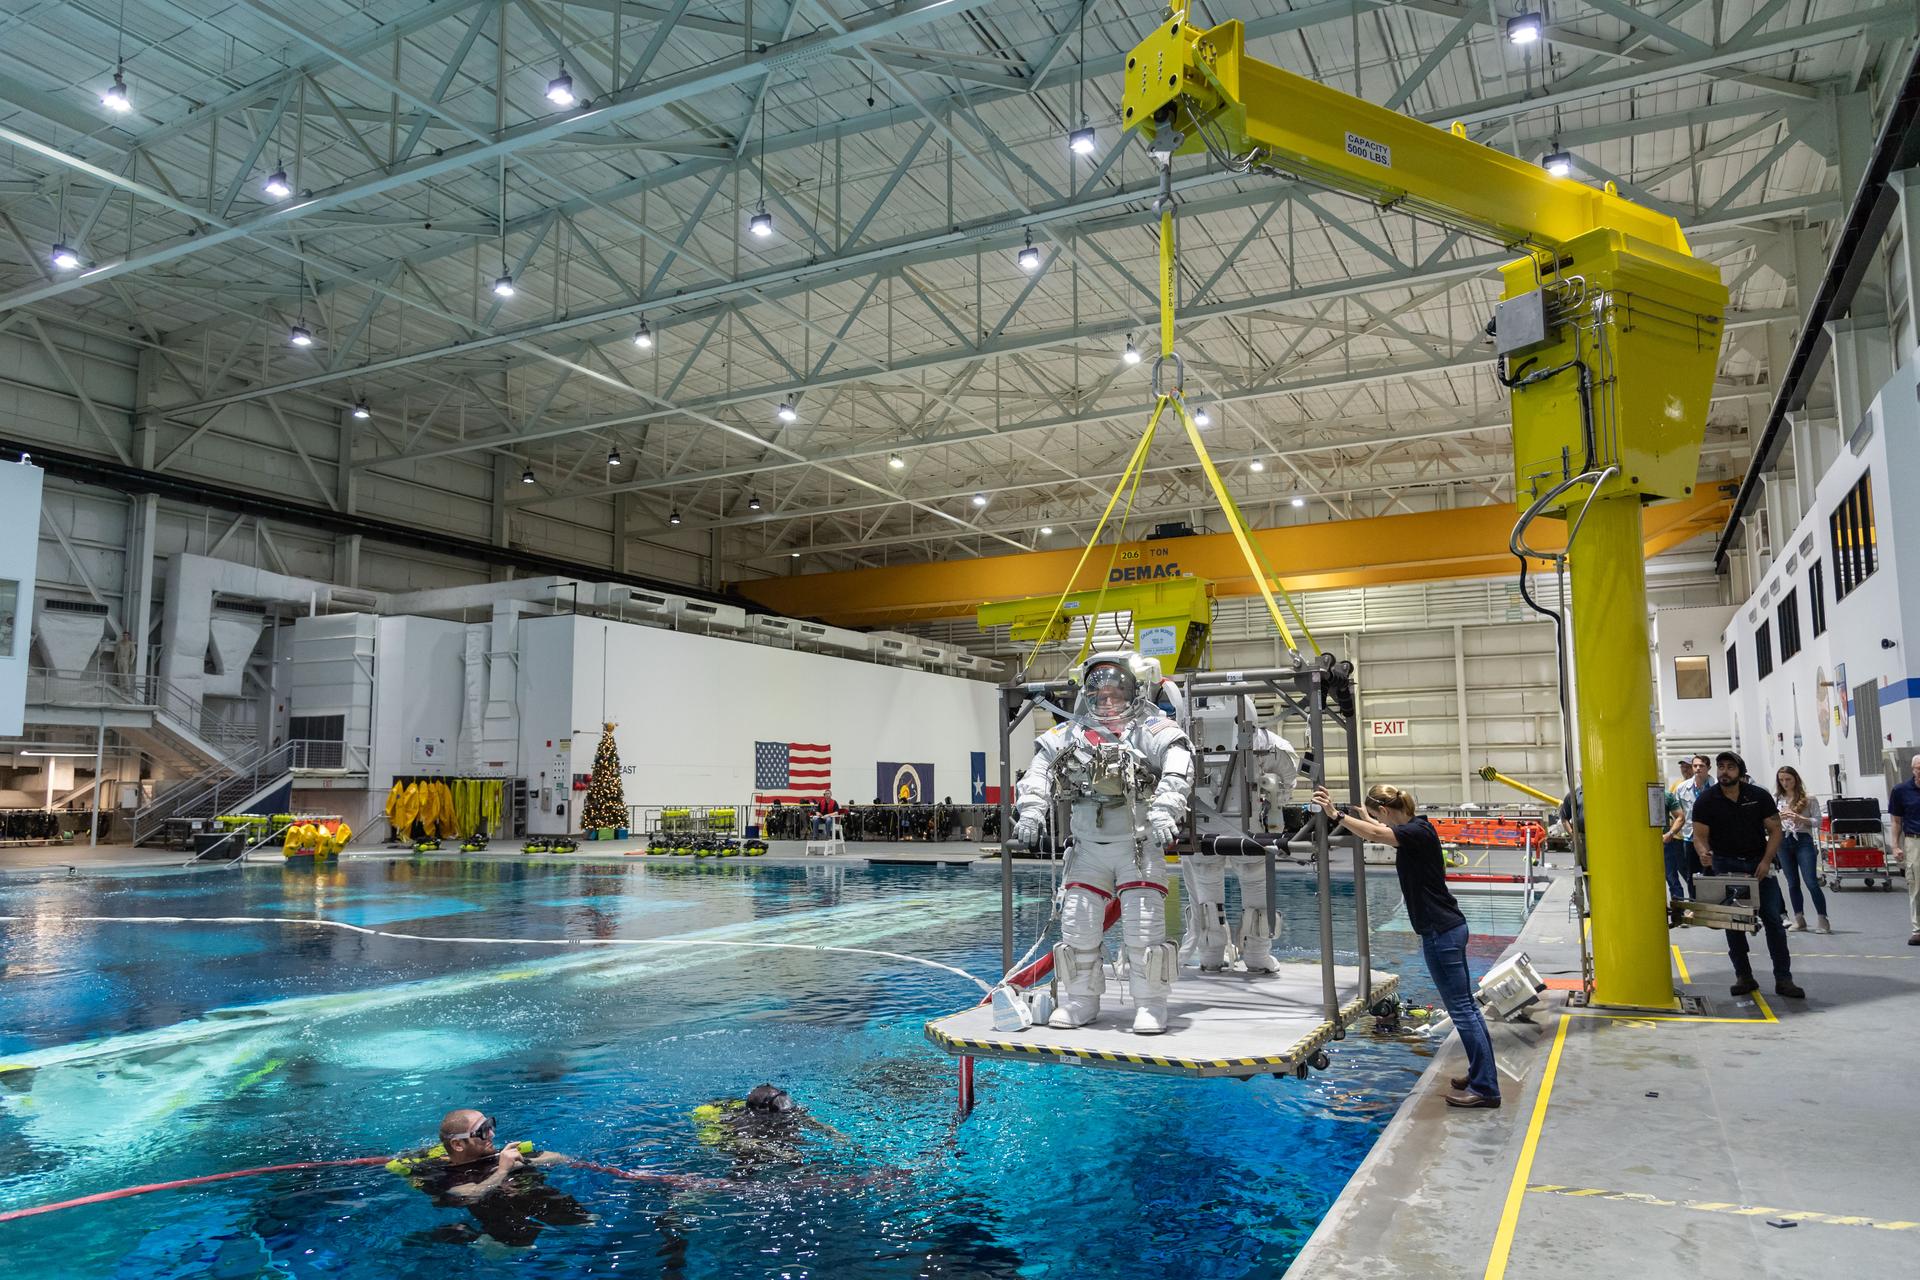 Commercial Crew Program astronaut Barry “Butch” Wilmore prepares for Expedition 62 International Space Station spacewalk maintenance training at NASA’s Neutral Buoyancy Lab in Houston on Nov. 30, 2018.